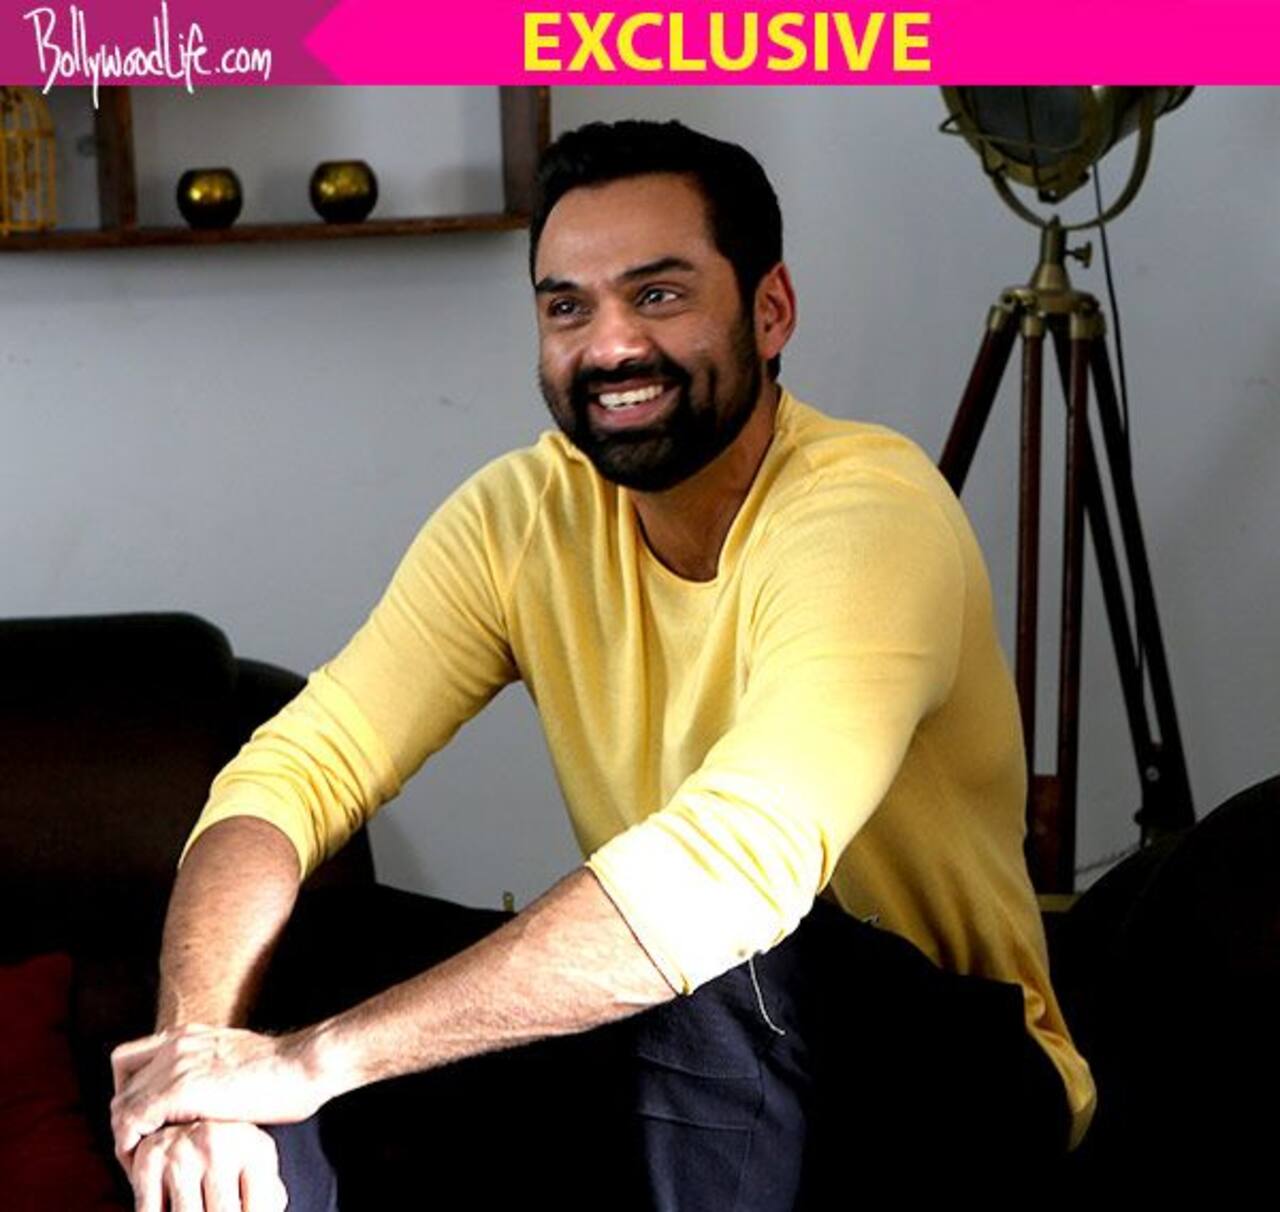 Abhay Deol provides a hilarious twist to Dev D; makes Paro and Chandramukhi lovers in the after life - watch video